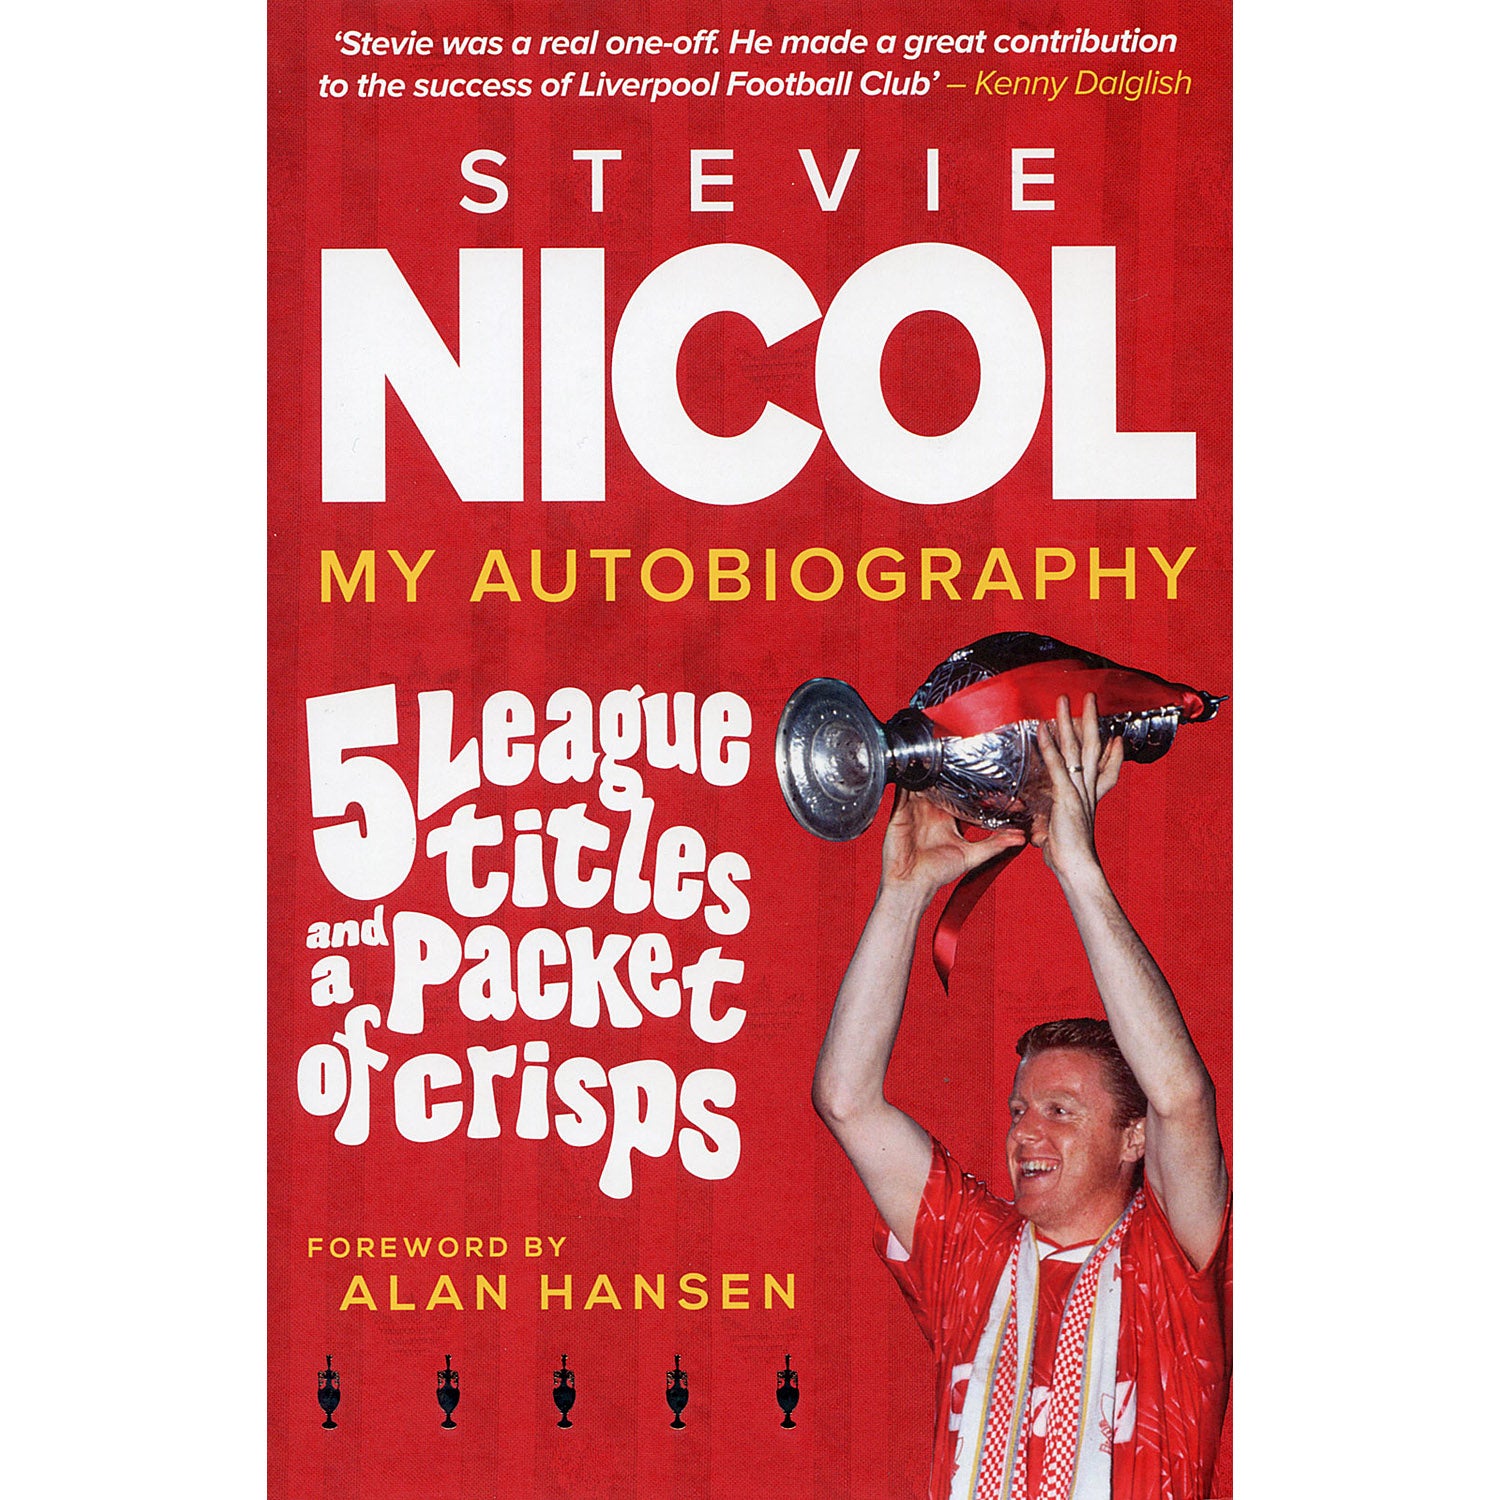 Stevie Nicol – 5 League titles and a packet of crisps – My Autobiography